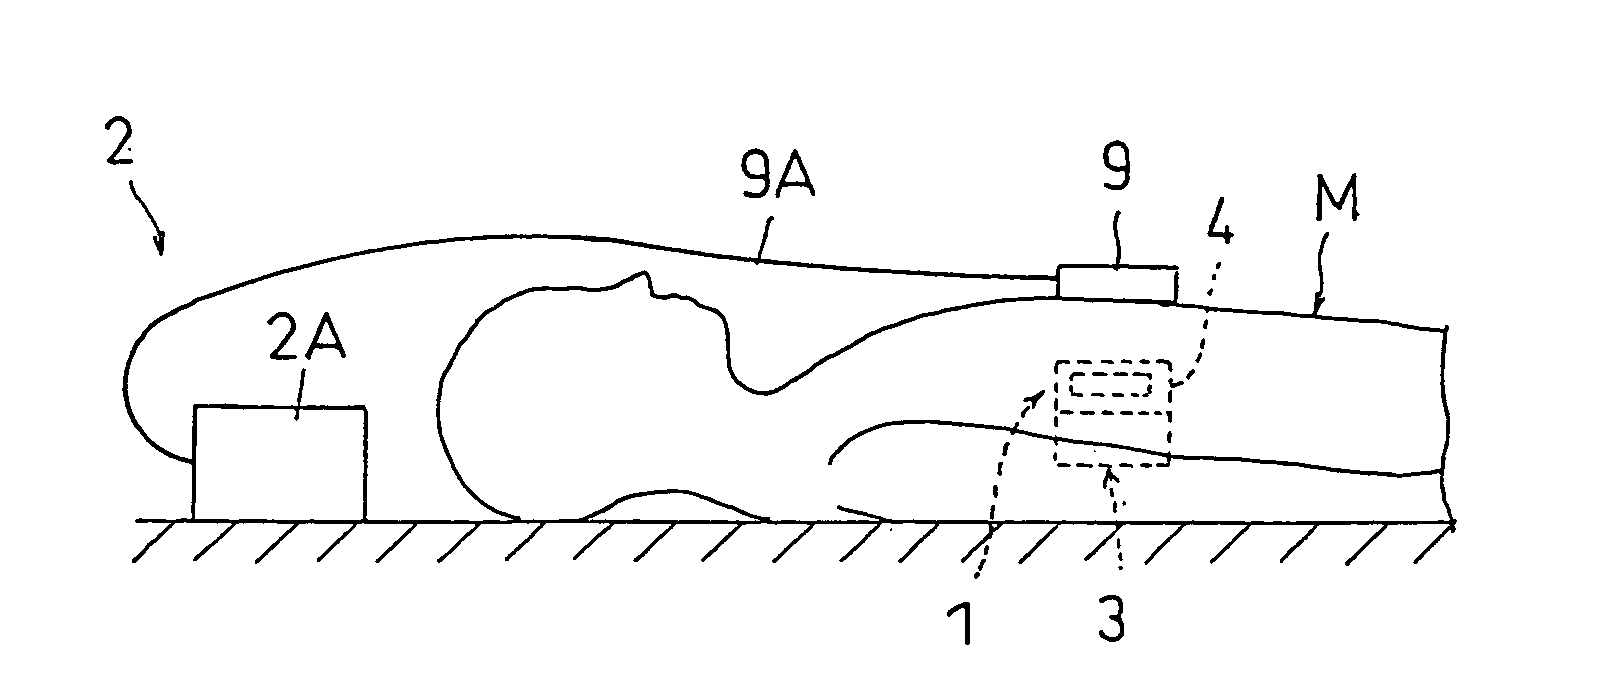 Non-intrusion type charging system for artificial organ, capacitor and power supplying device used in the system